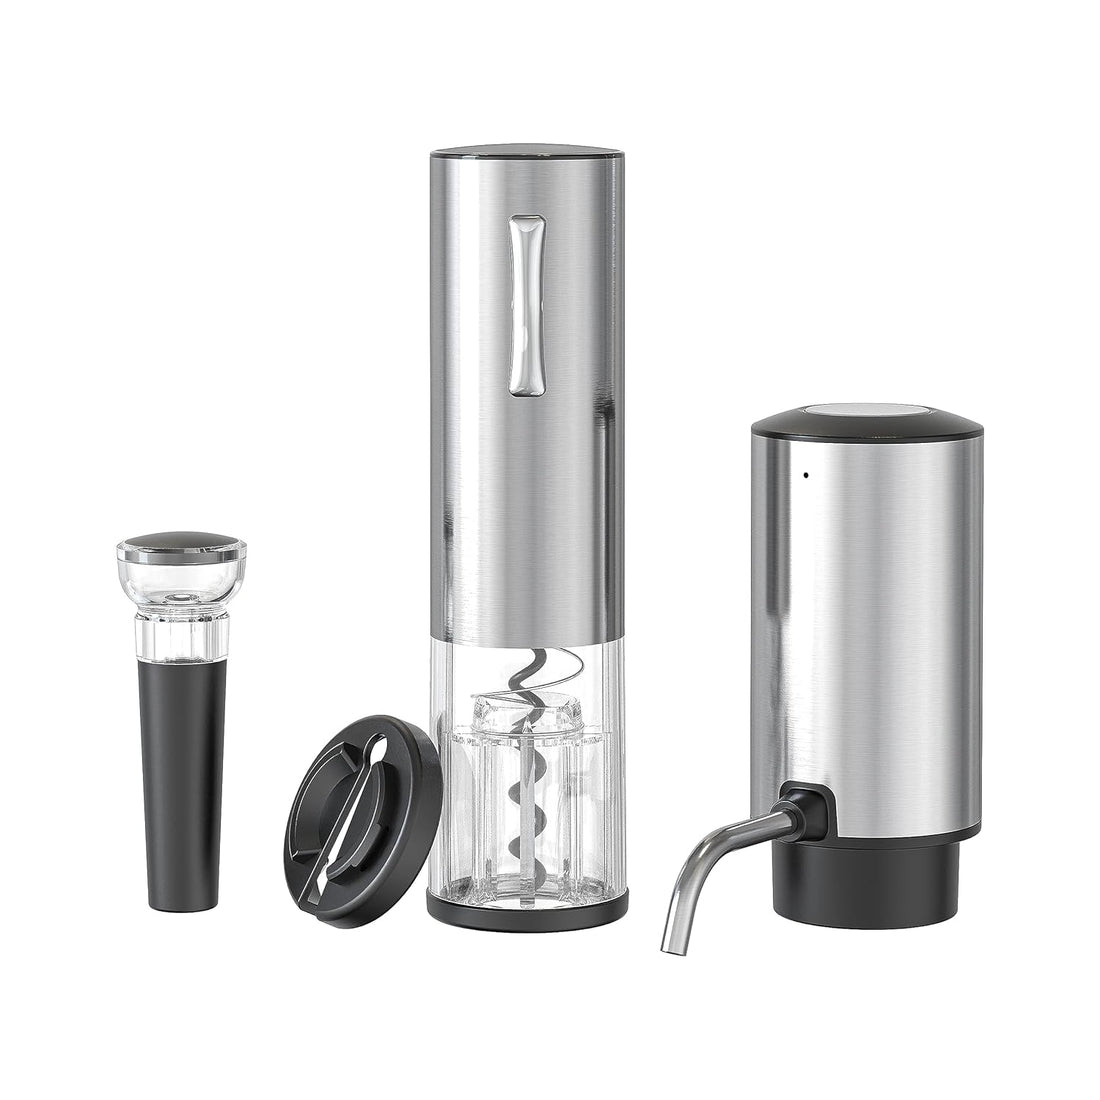 Electric Wine Decanter and Electric Wine Opener, CorporateGiftPro Electric Wine Aerator and Opener Set with Wine Foil Cutter, and Wine Stopper Vacuum Saver (Stainless Steel Wine Opener Aerator Set)